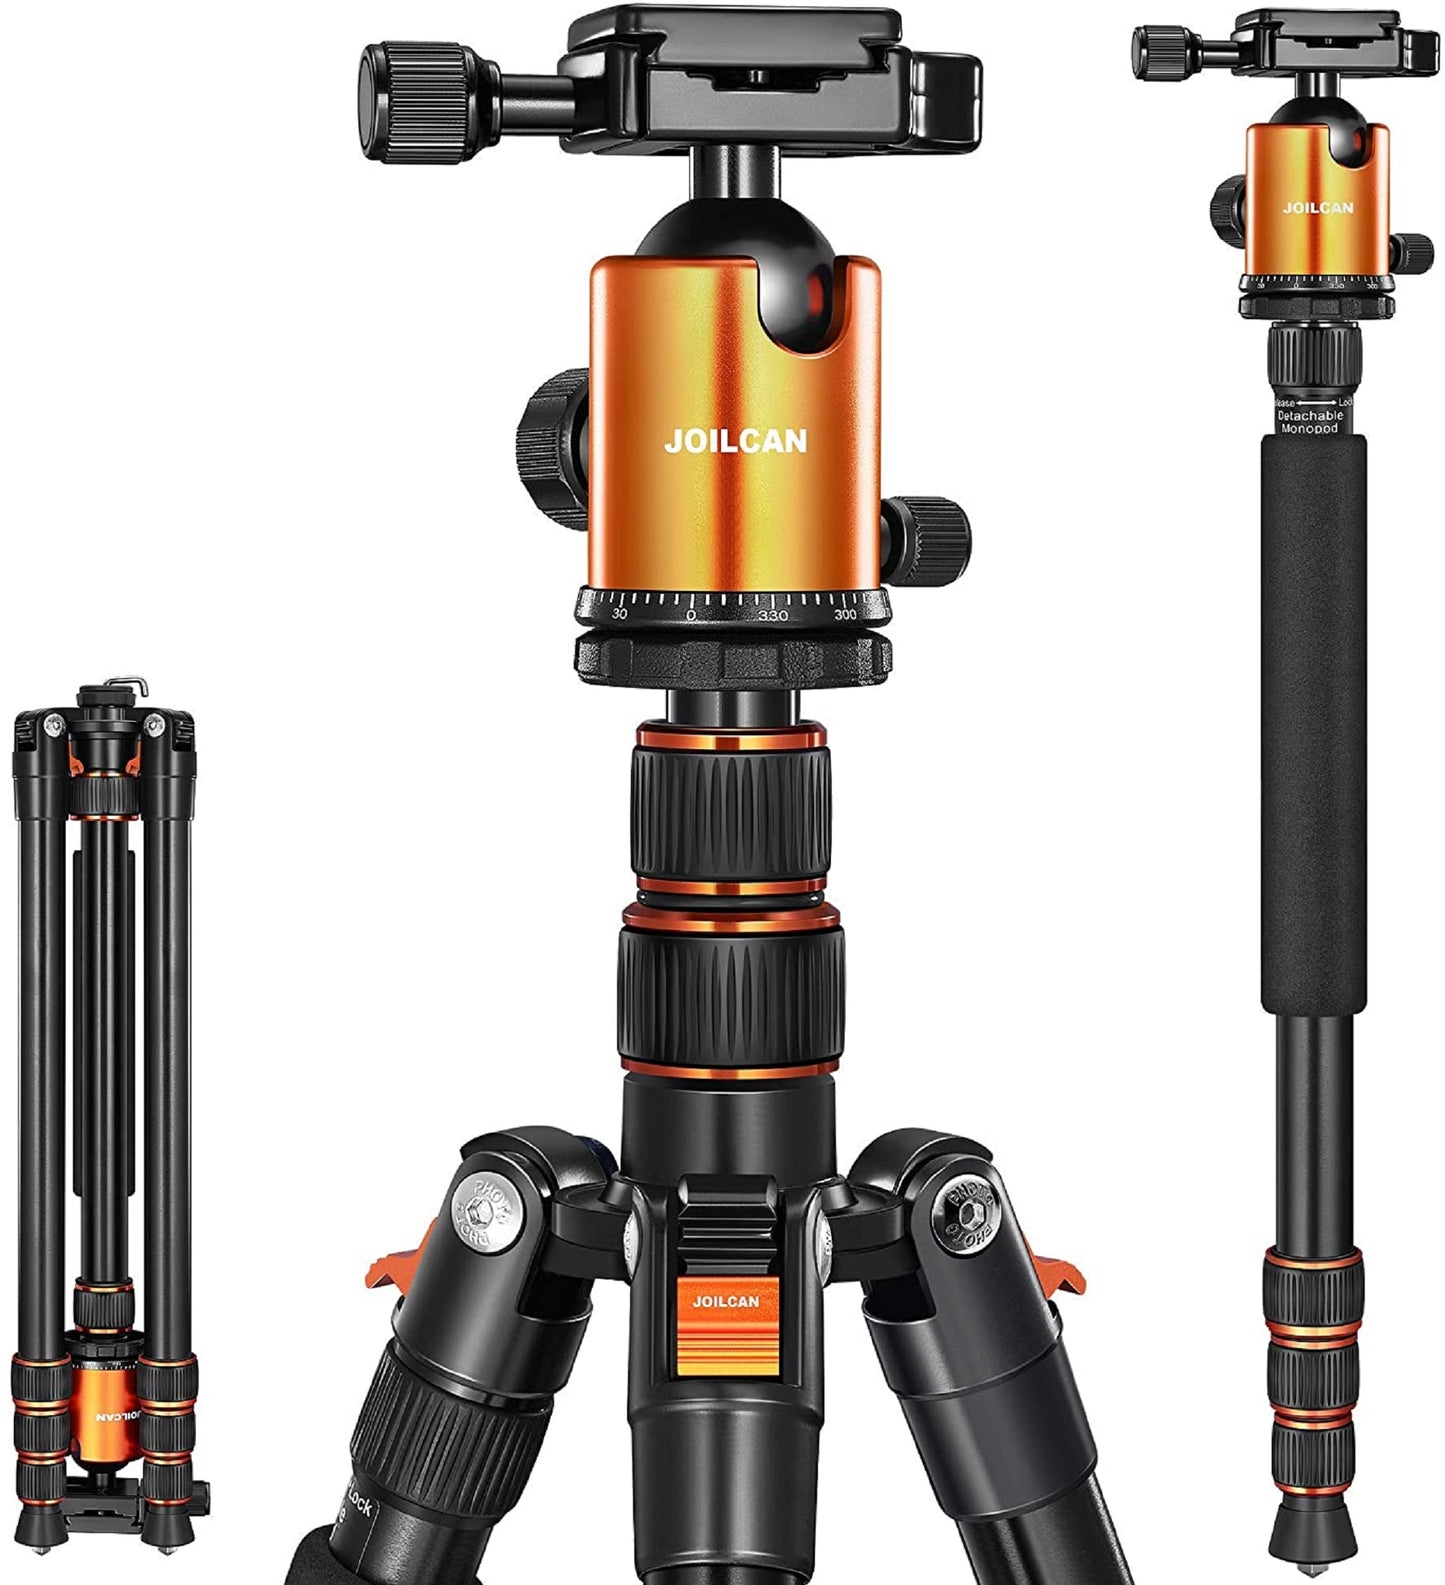 Joilcan 80-inch Tripod for Camera, Aluminum Tripod for DSLR,Monopod, Lightweight Tripod with 360 Degree Ball Head Stable for Travel and Work 18.5"-80",24lb Load (Orange)